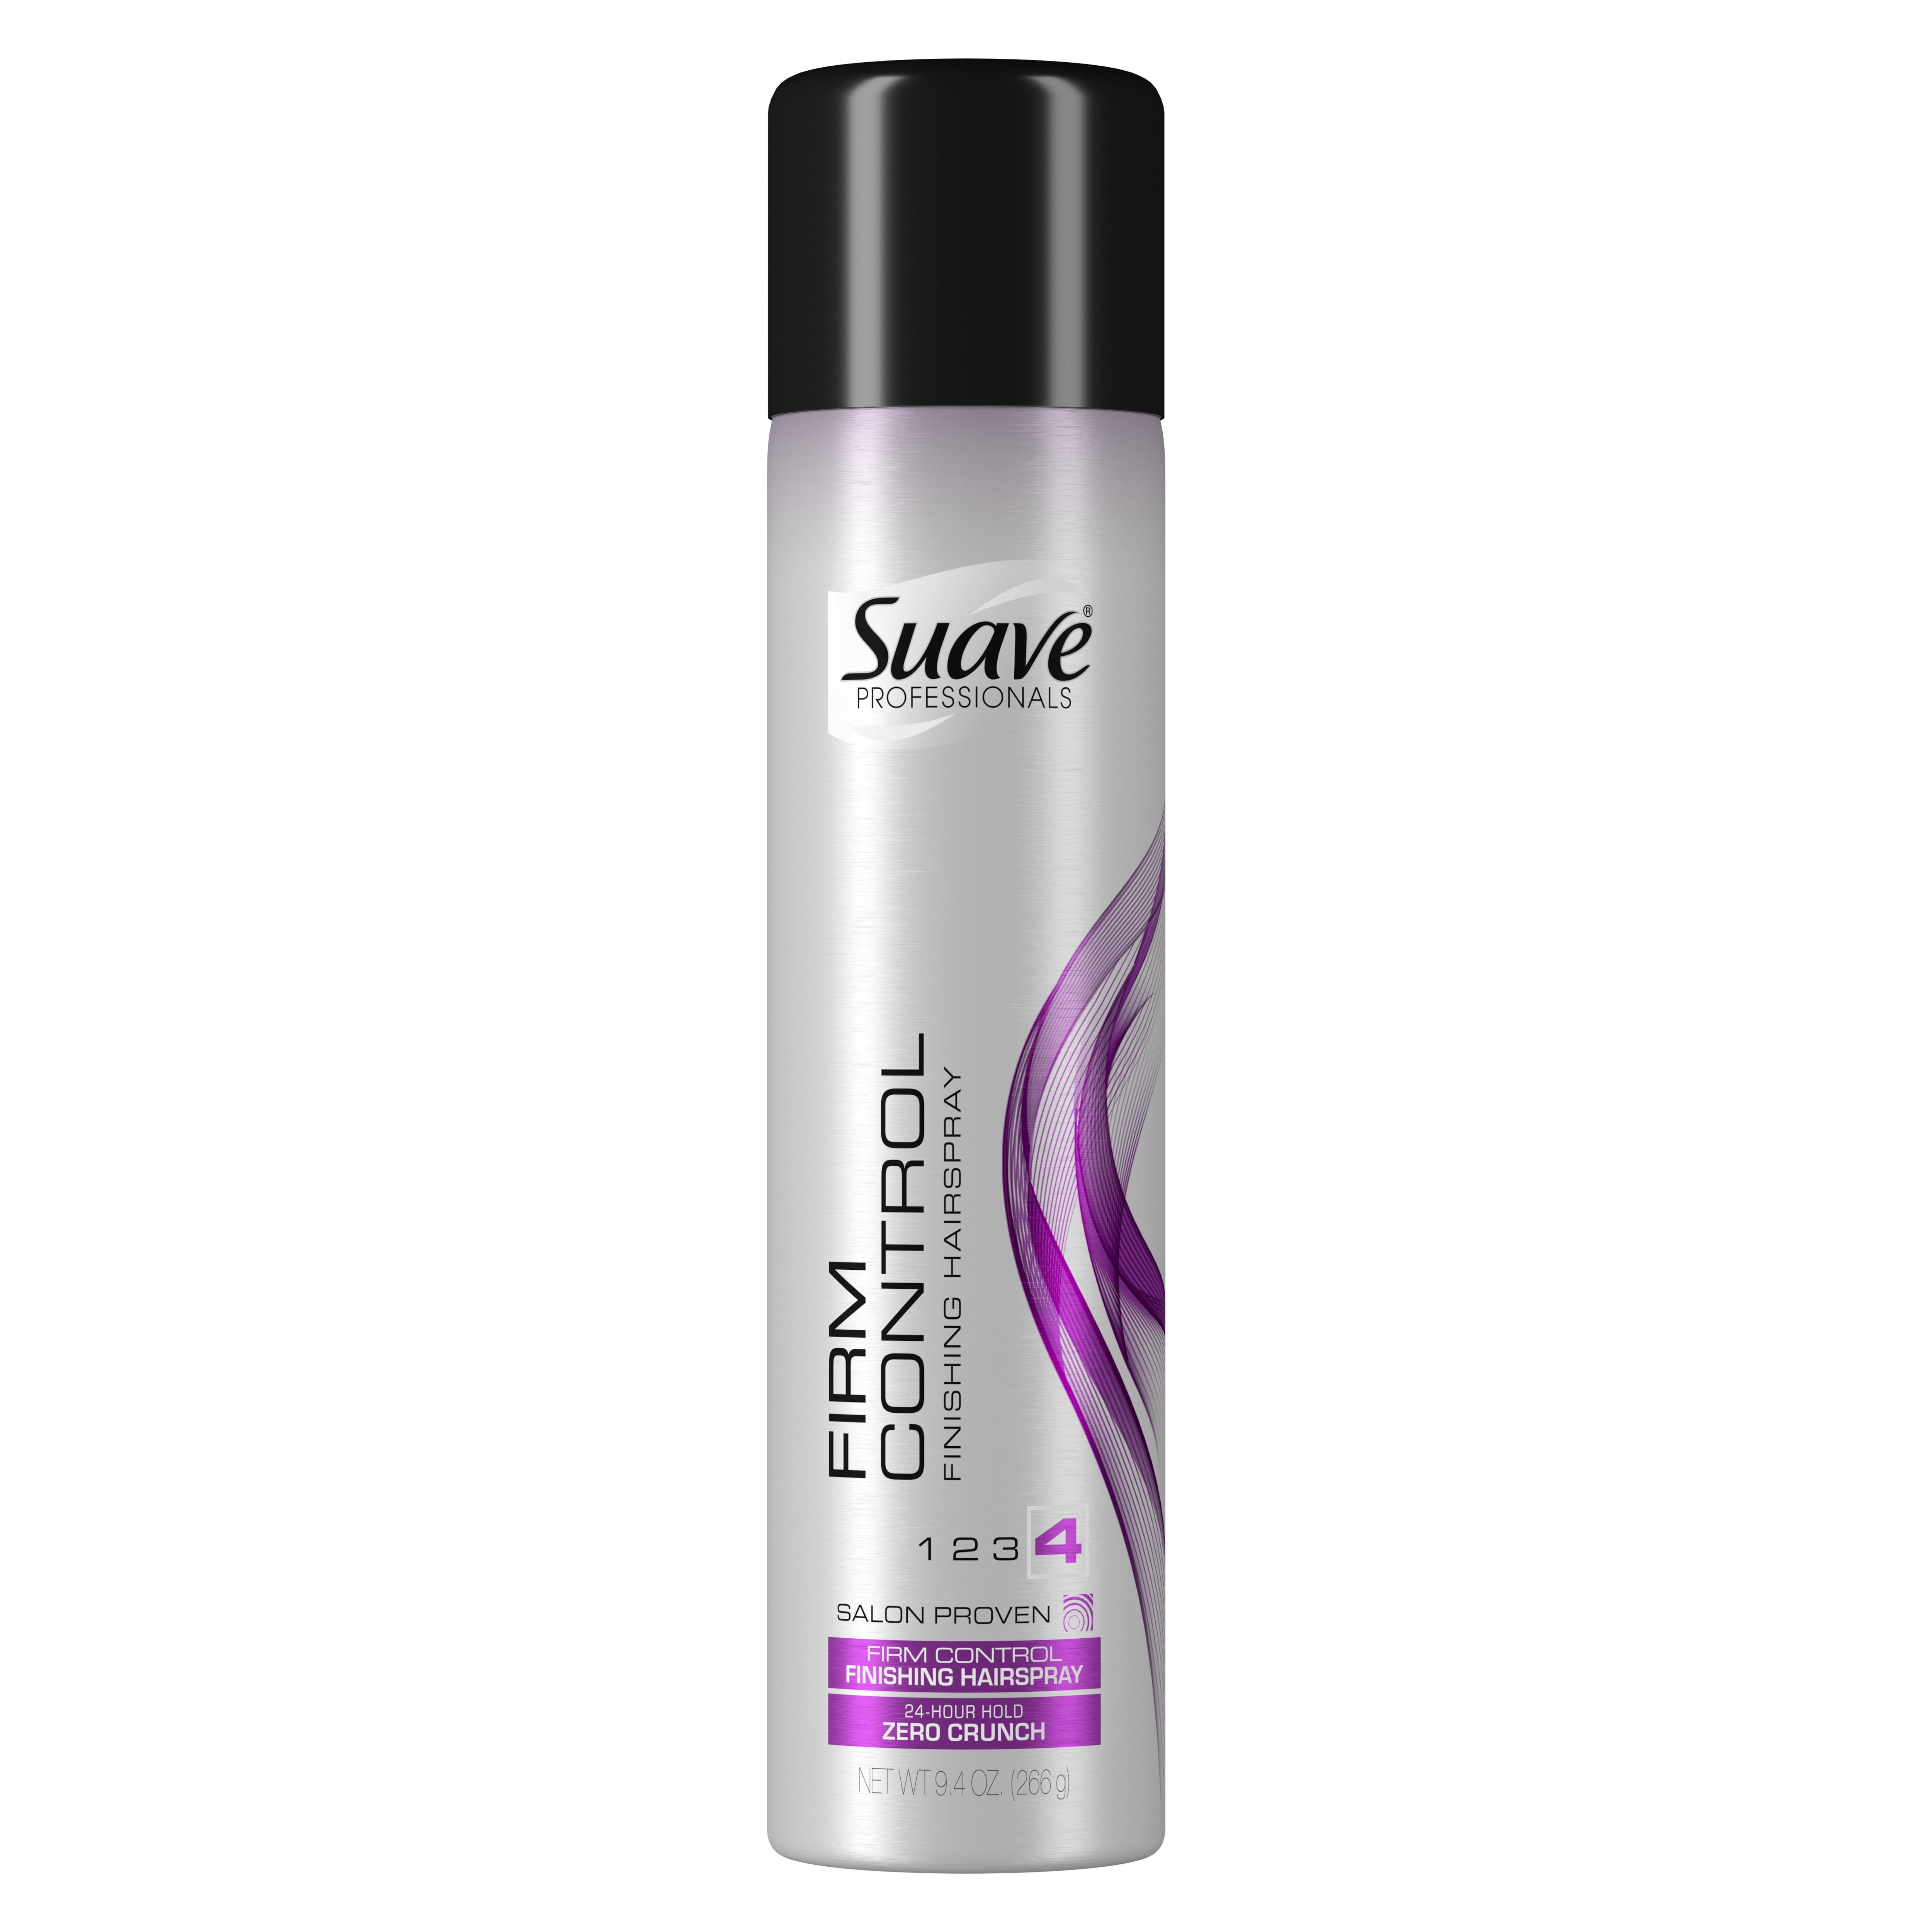 Suave Professionals Hairspray Firm Control Finishing and Hair Styling  Hairspray  oz  